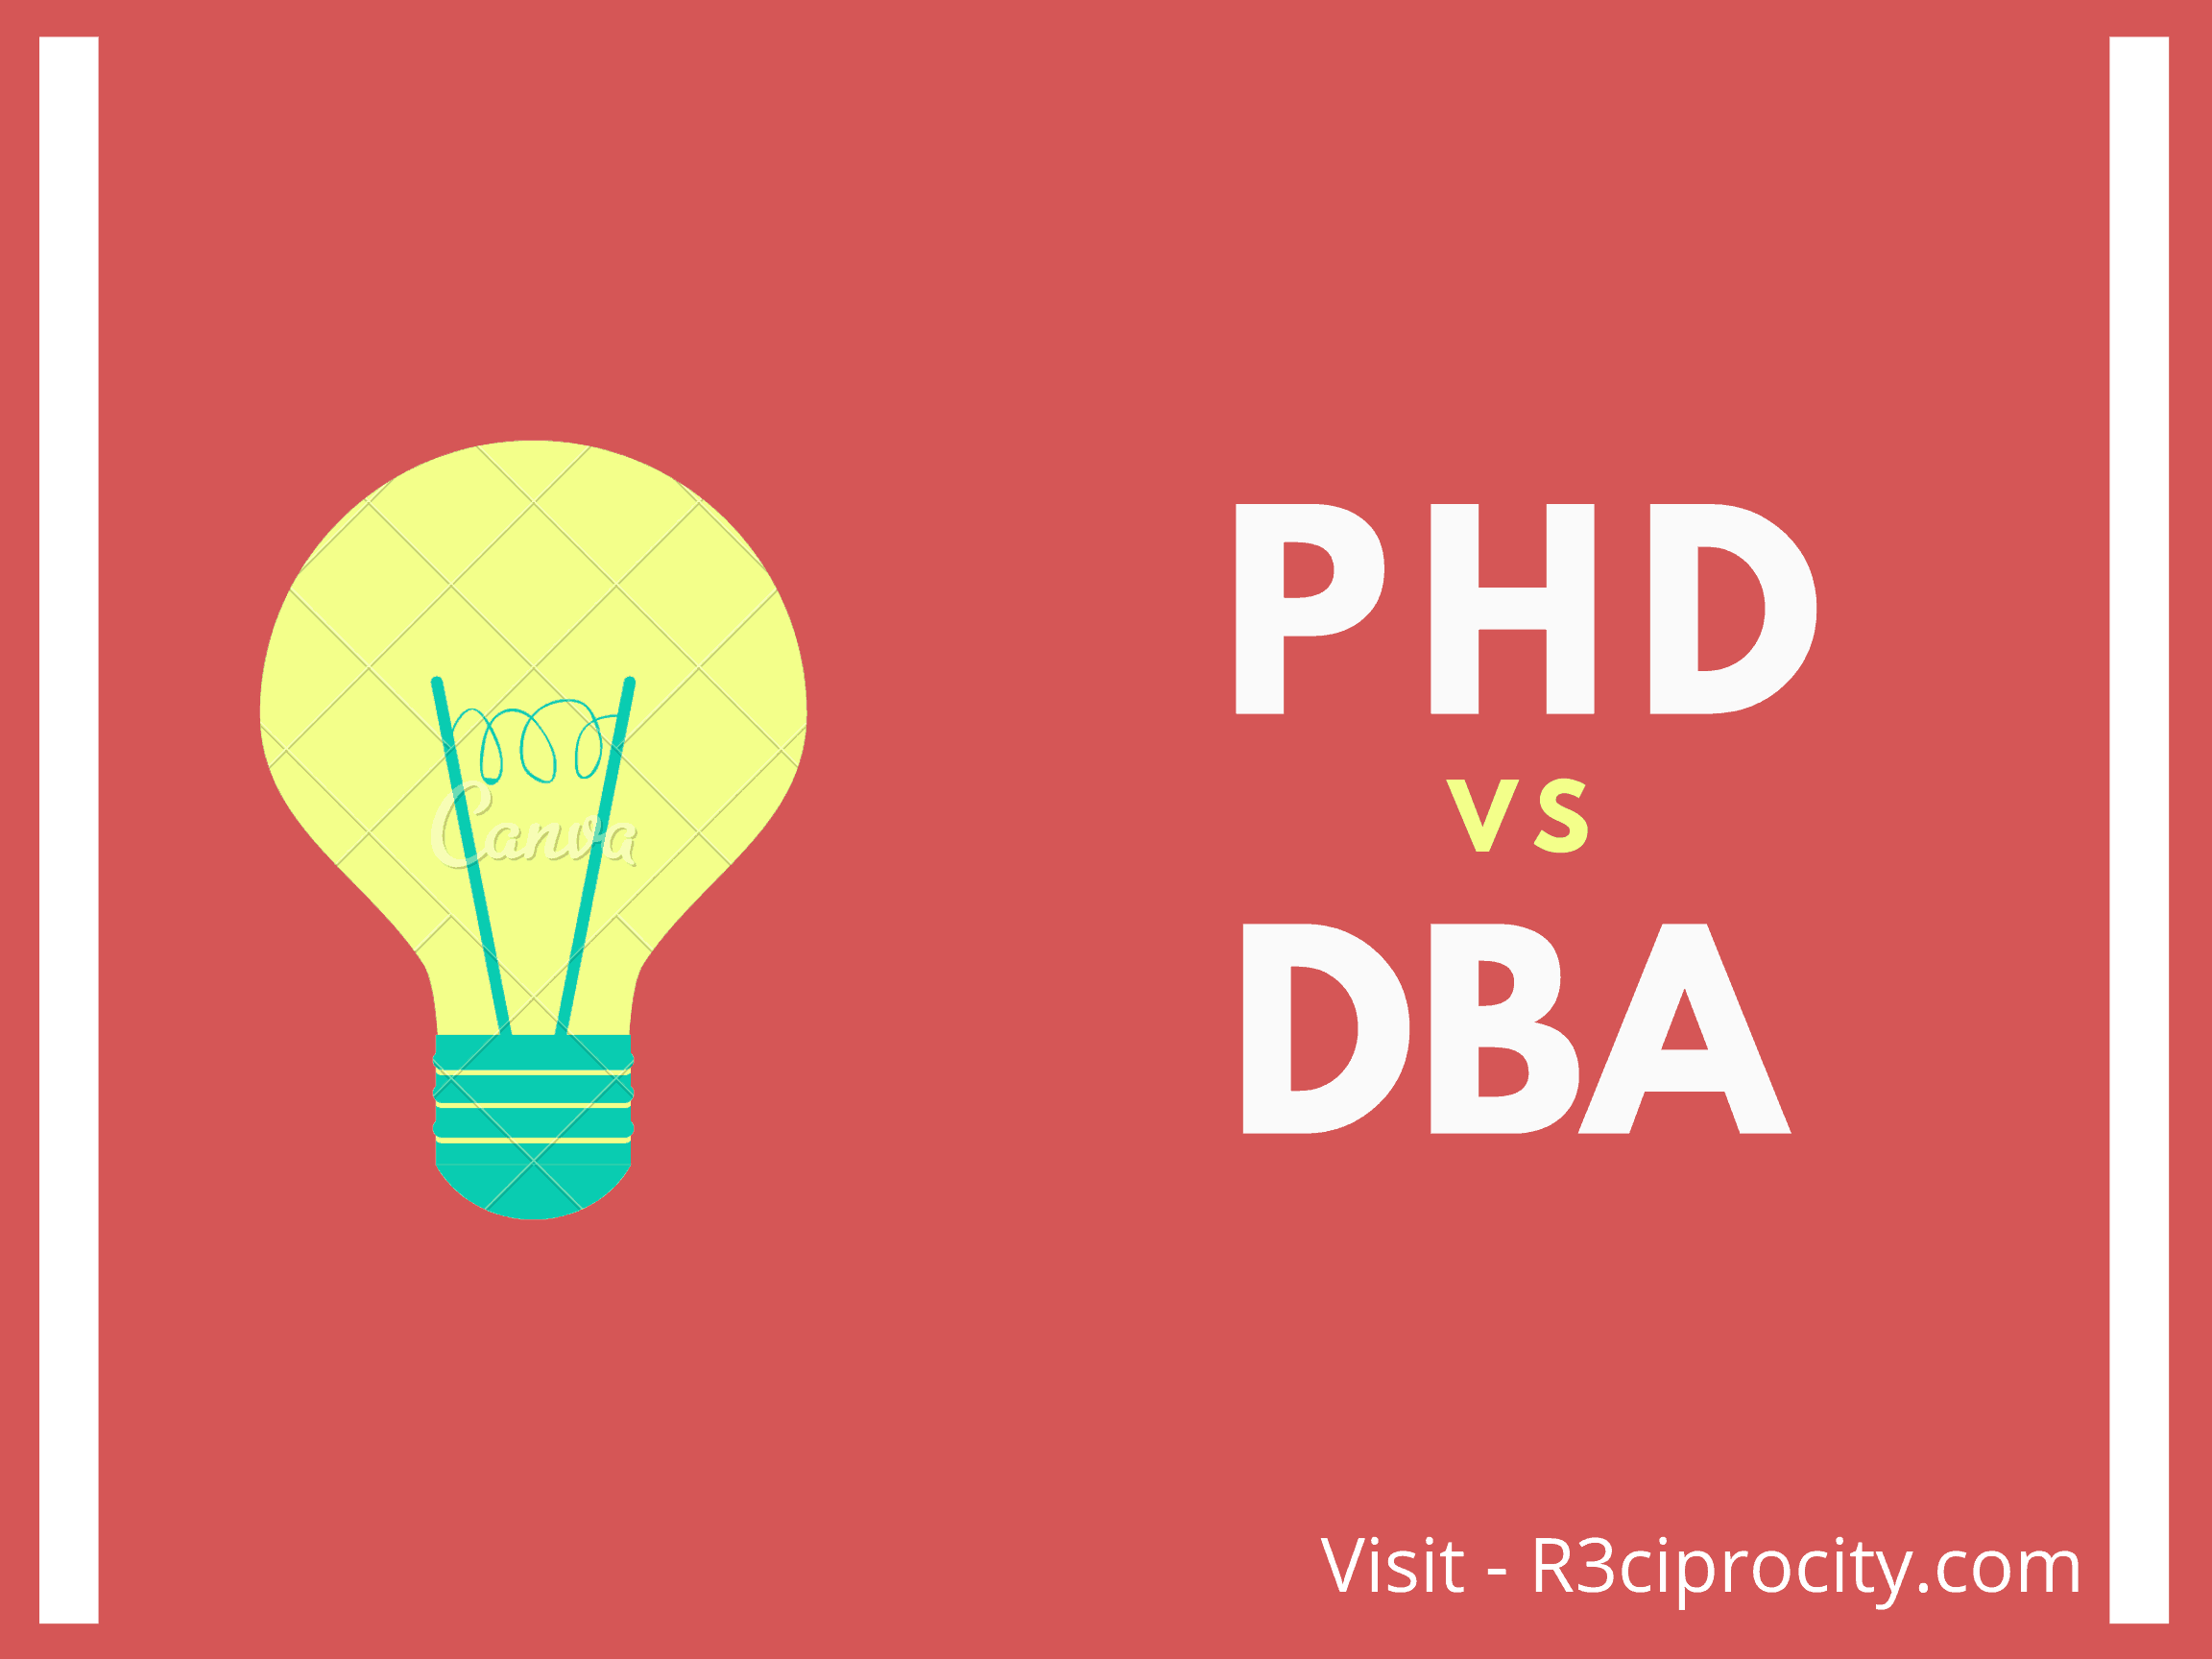 is dba equal to phd